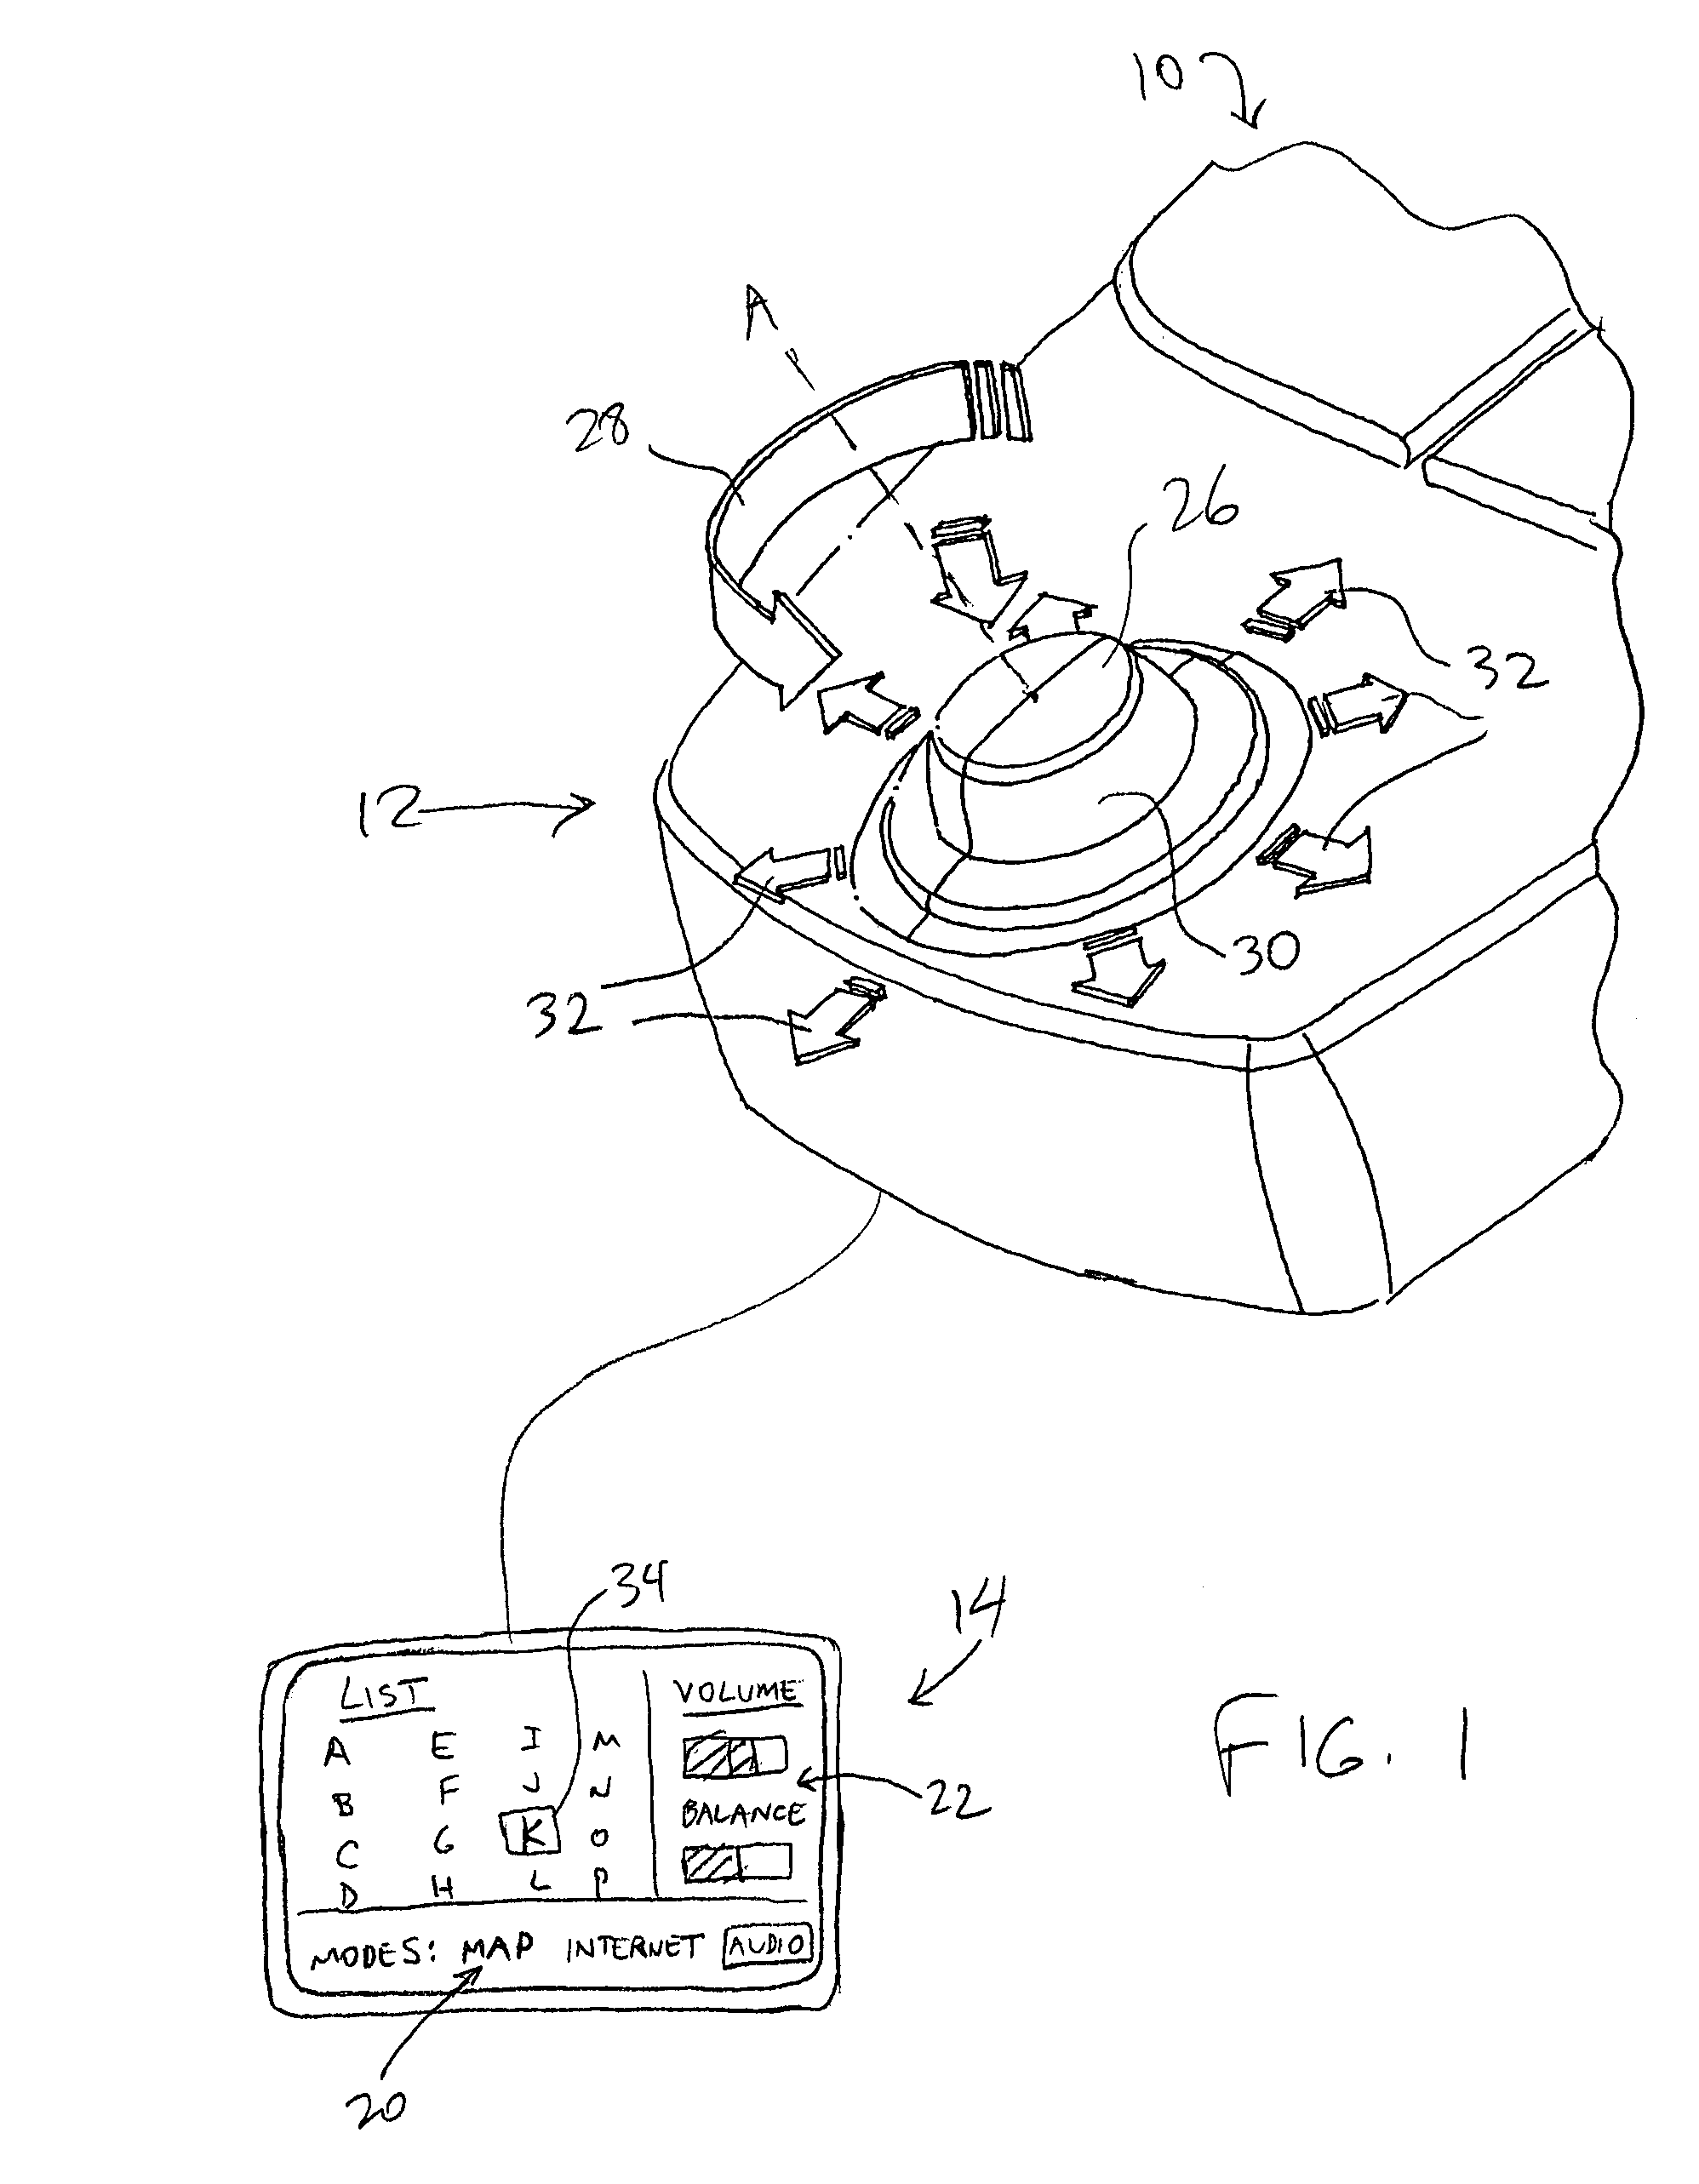 Mechanisms for control knobs and other interface devices